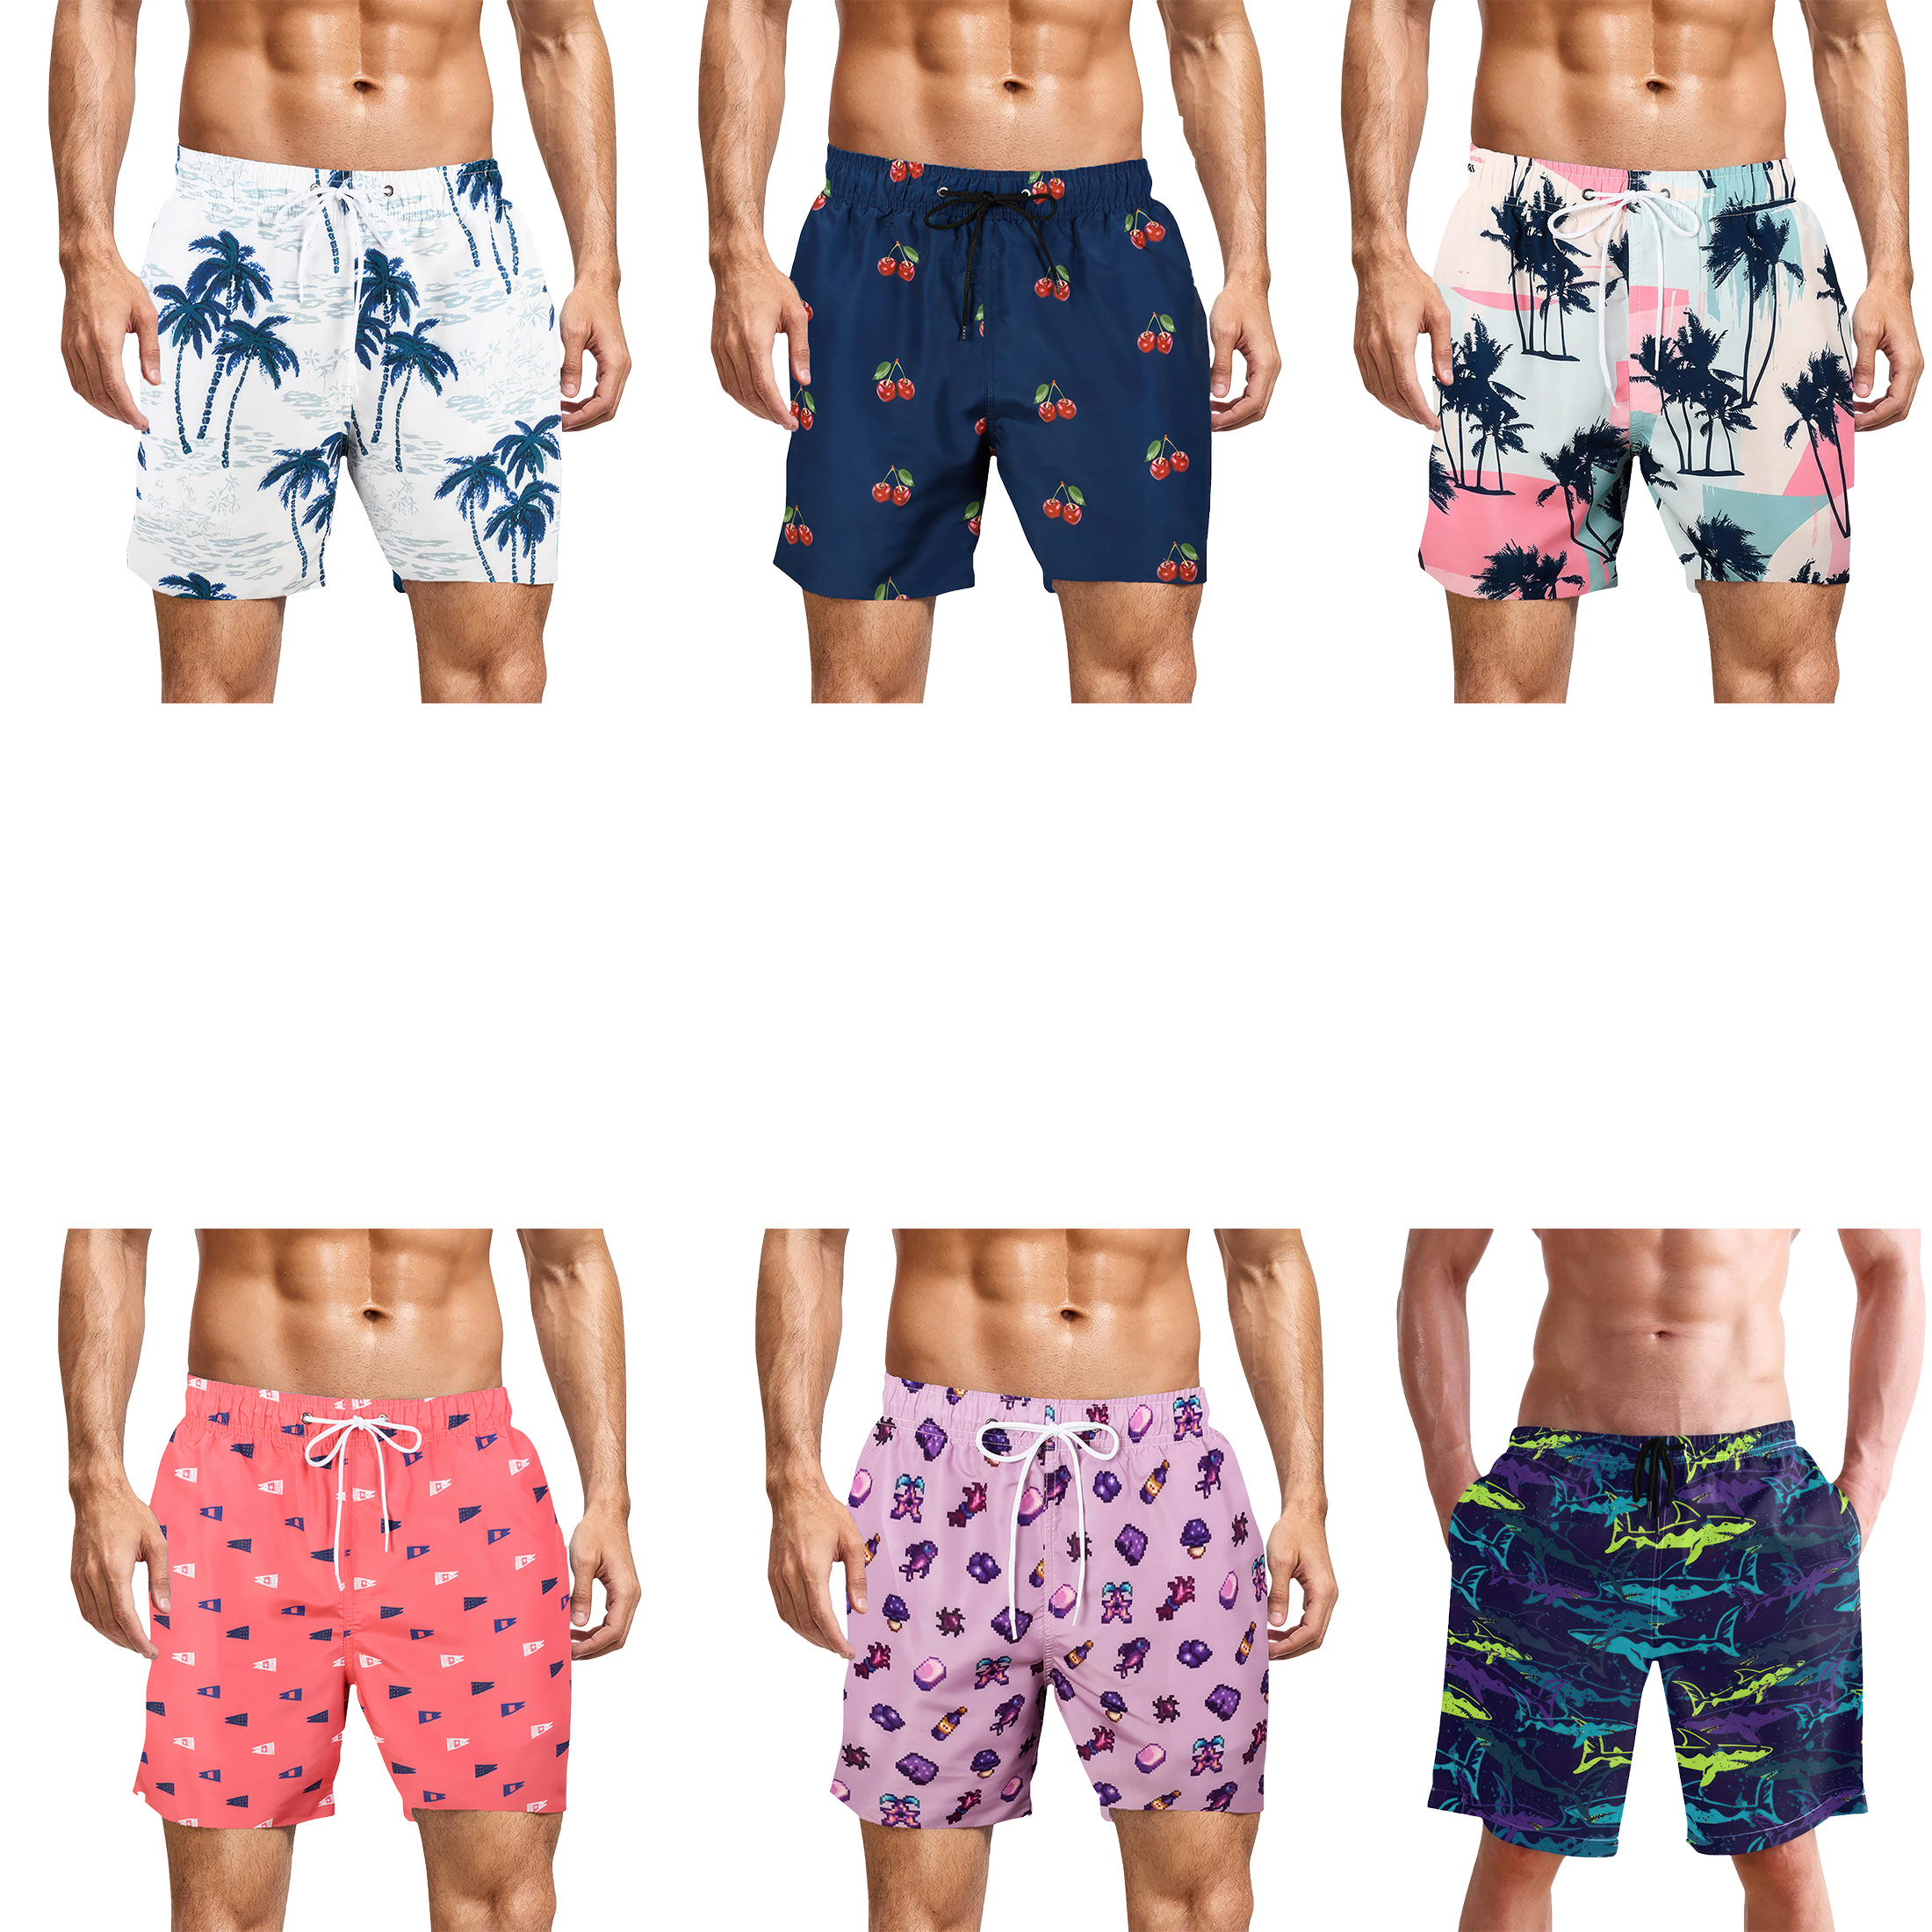 3-Pack Men's Printed Swim Shorts With Pockets Quick Dry Beachwear Bathing Suits Board Trunks - XXL